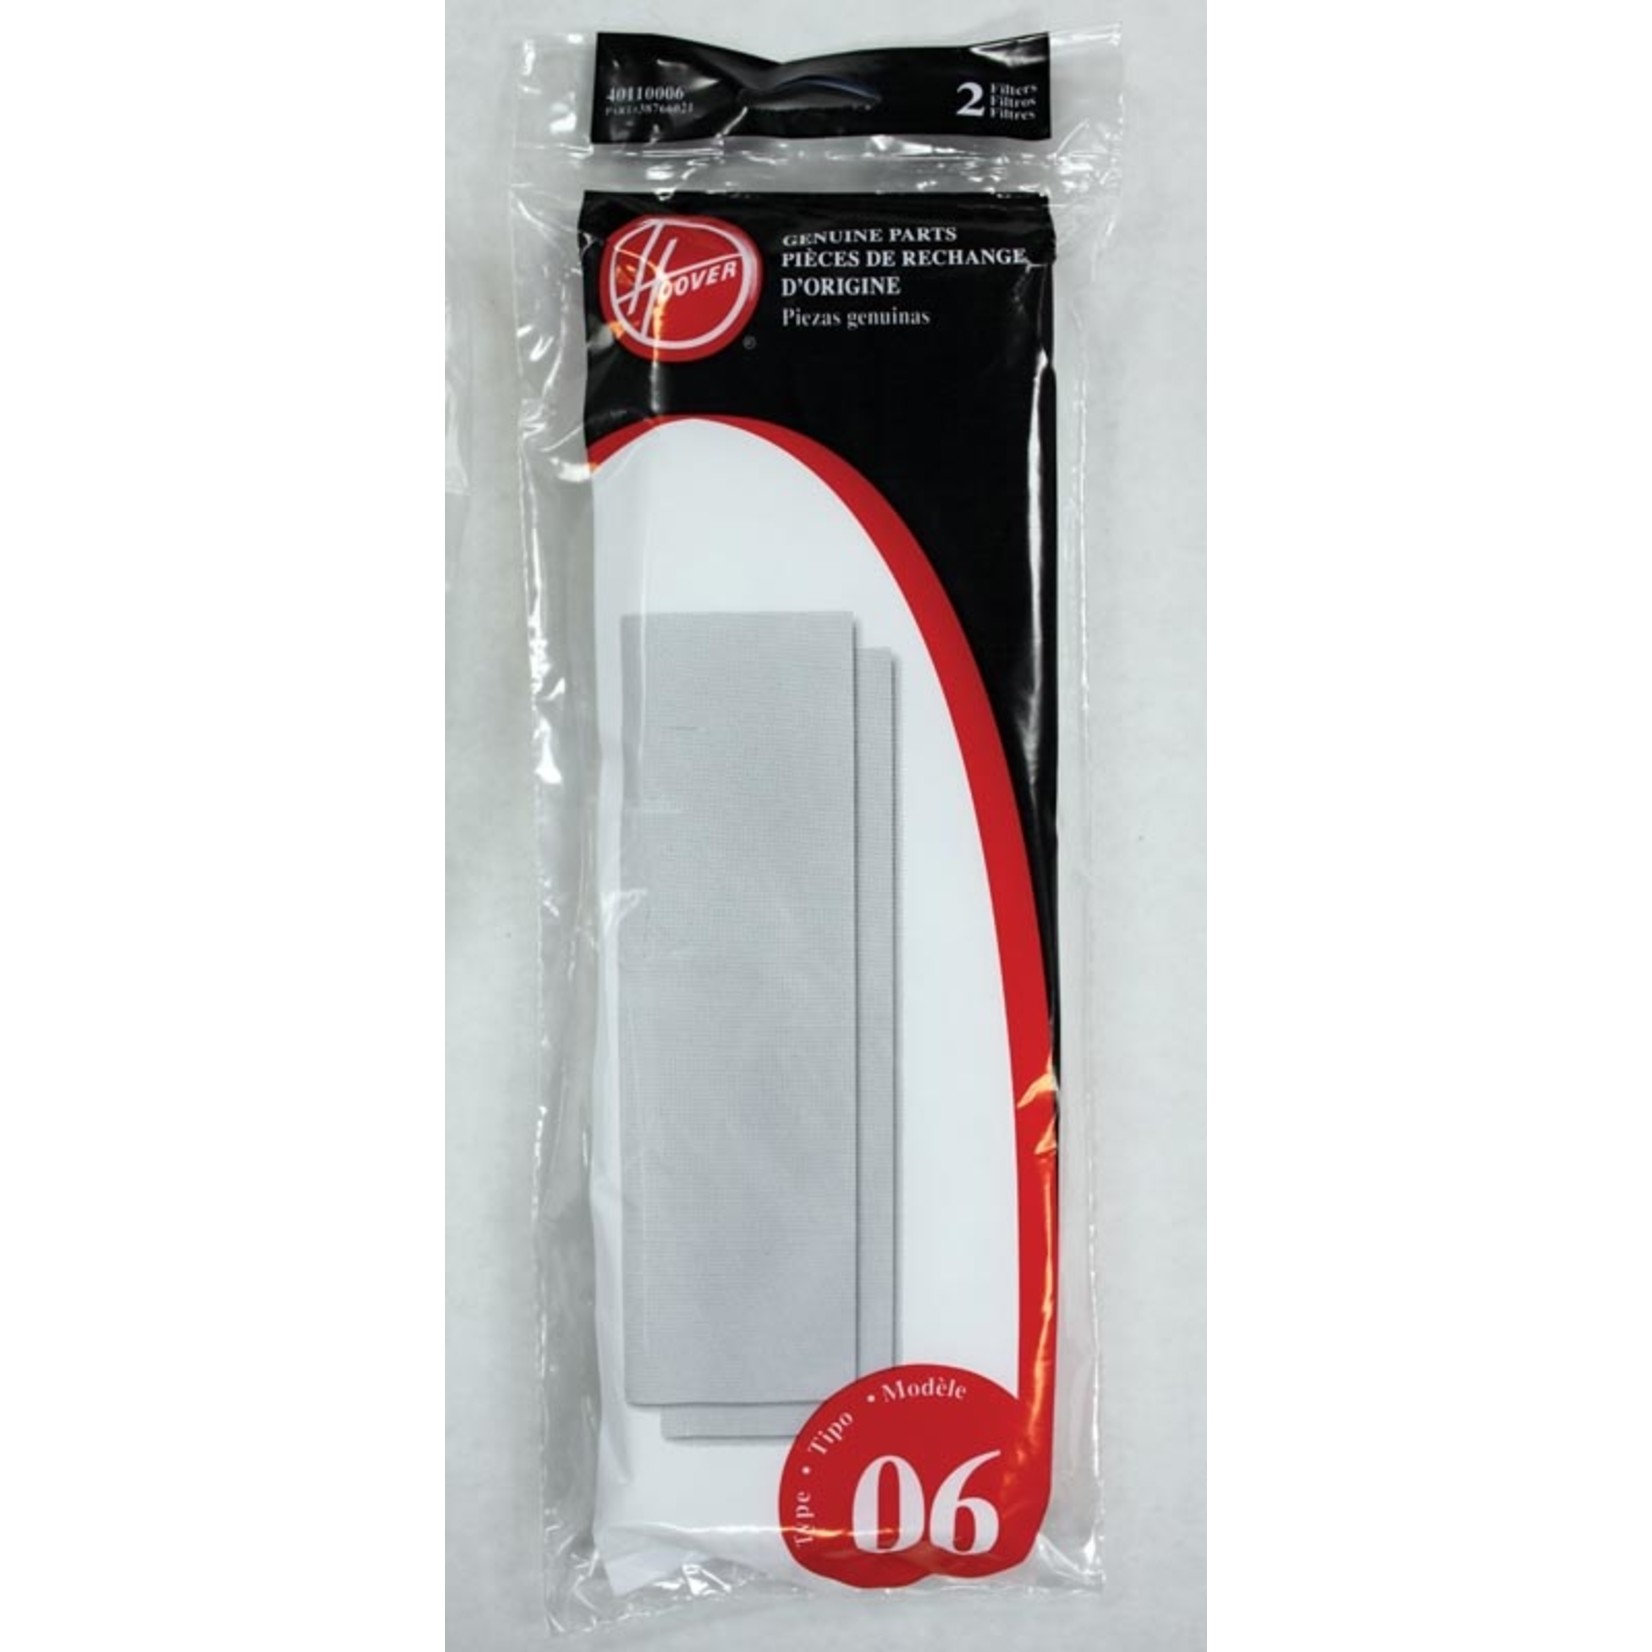 Hoover Hoover Style "06" Filter (2pk)